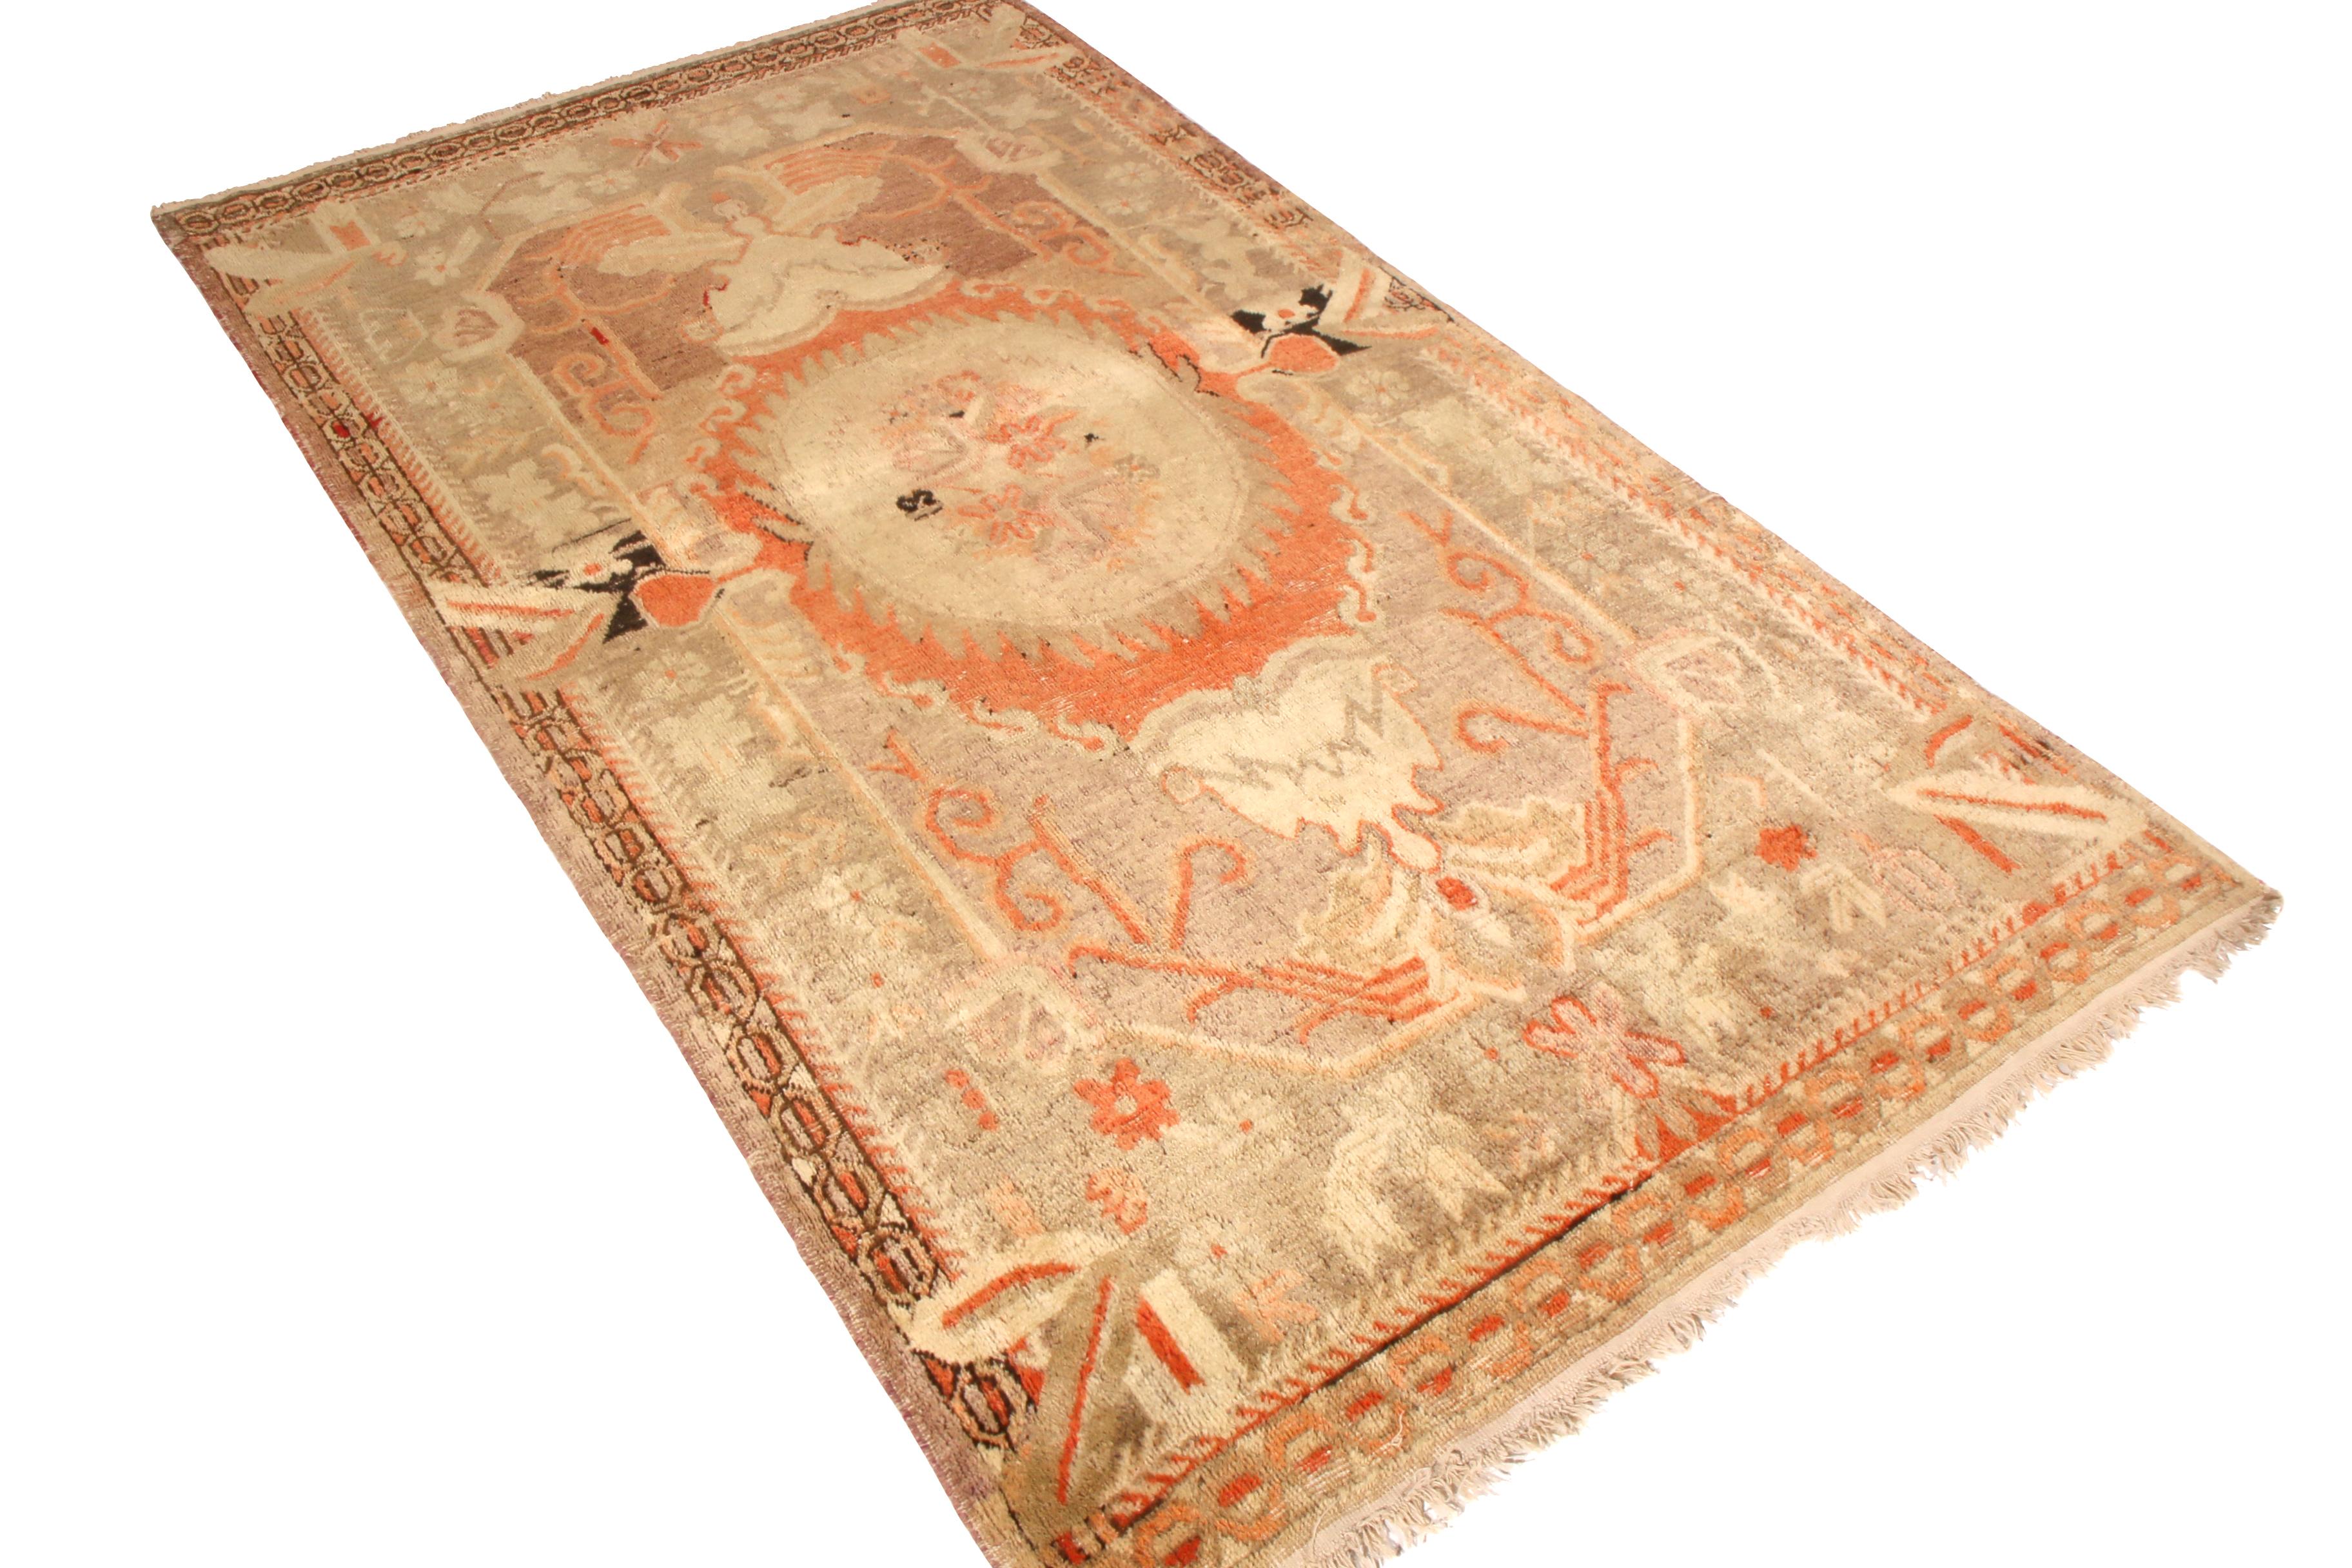 Made with hand knotted wool originating from East Turkestan between 1880-1890, this antique Khotan rug bears a remarkably unique traditional European sensibility in the nature of its medallion style pattern and complementary floral ornaments.